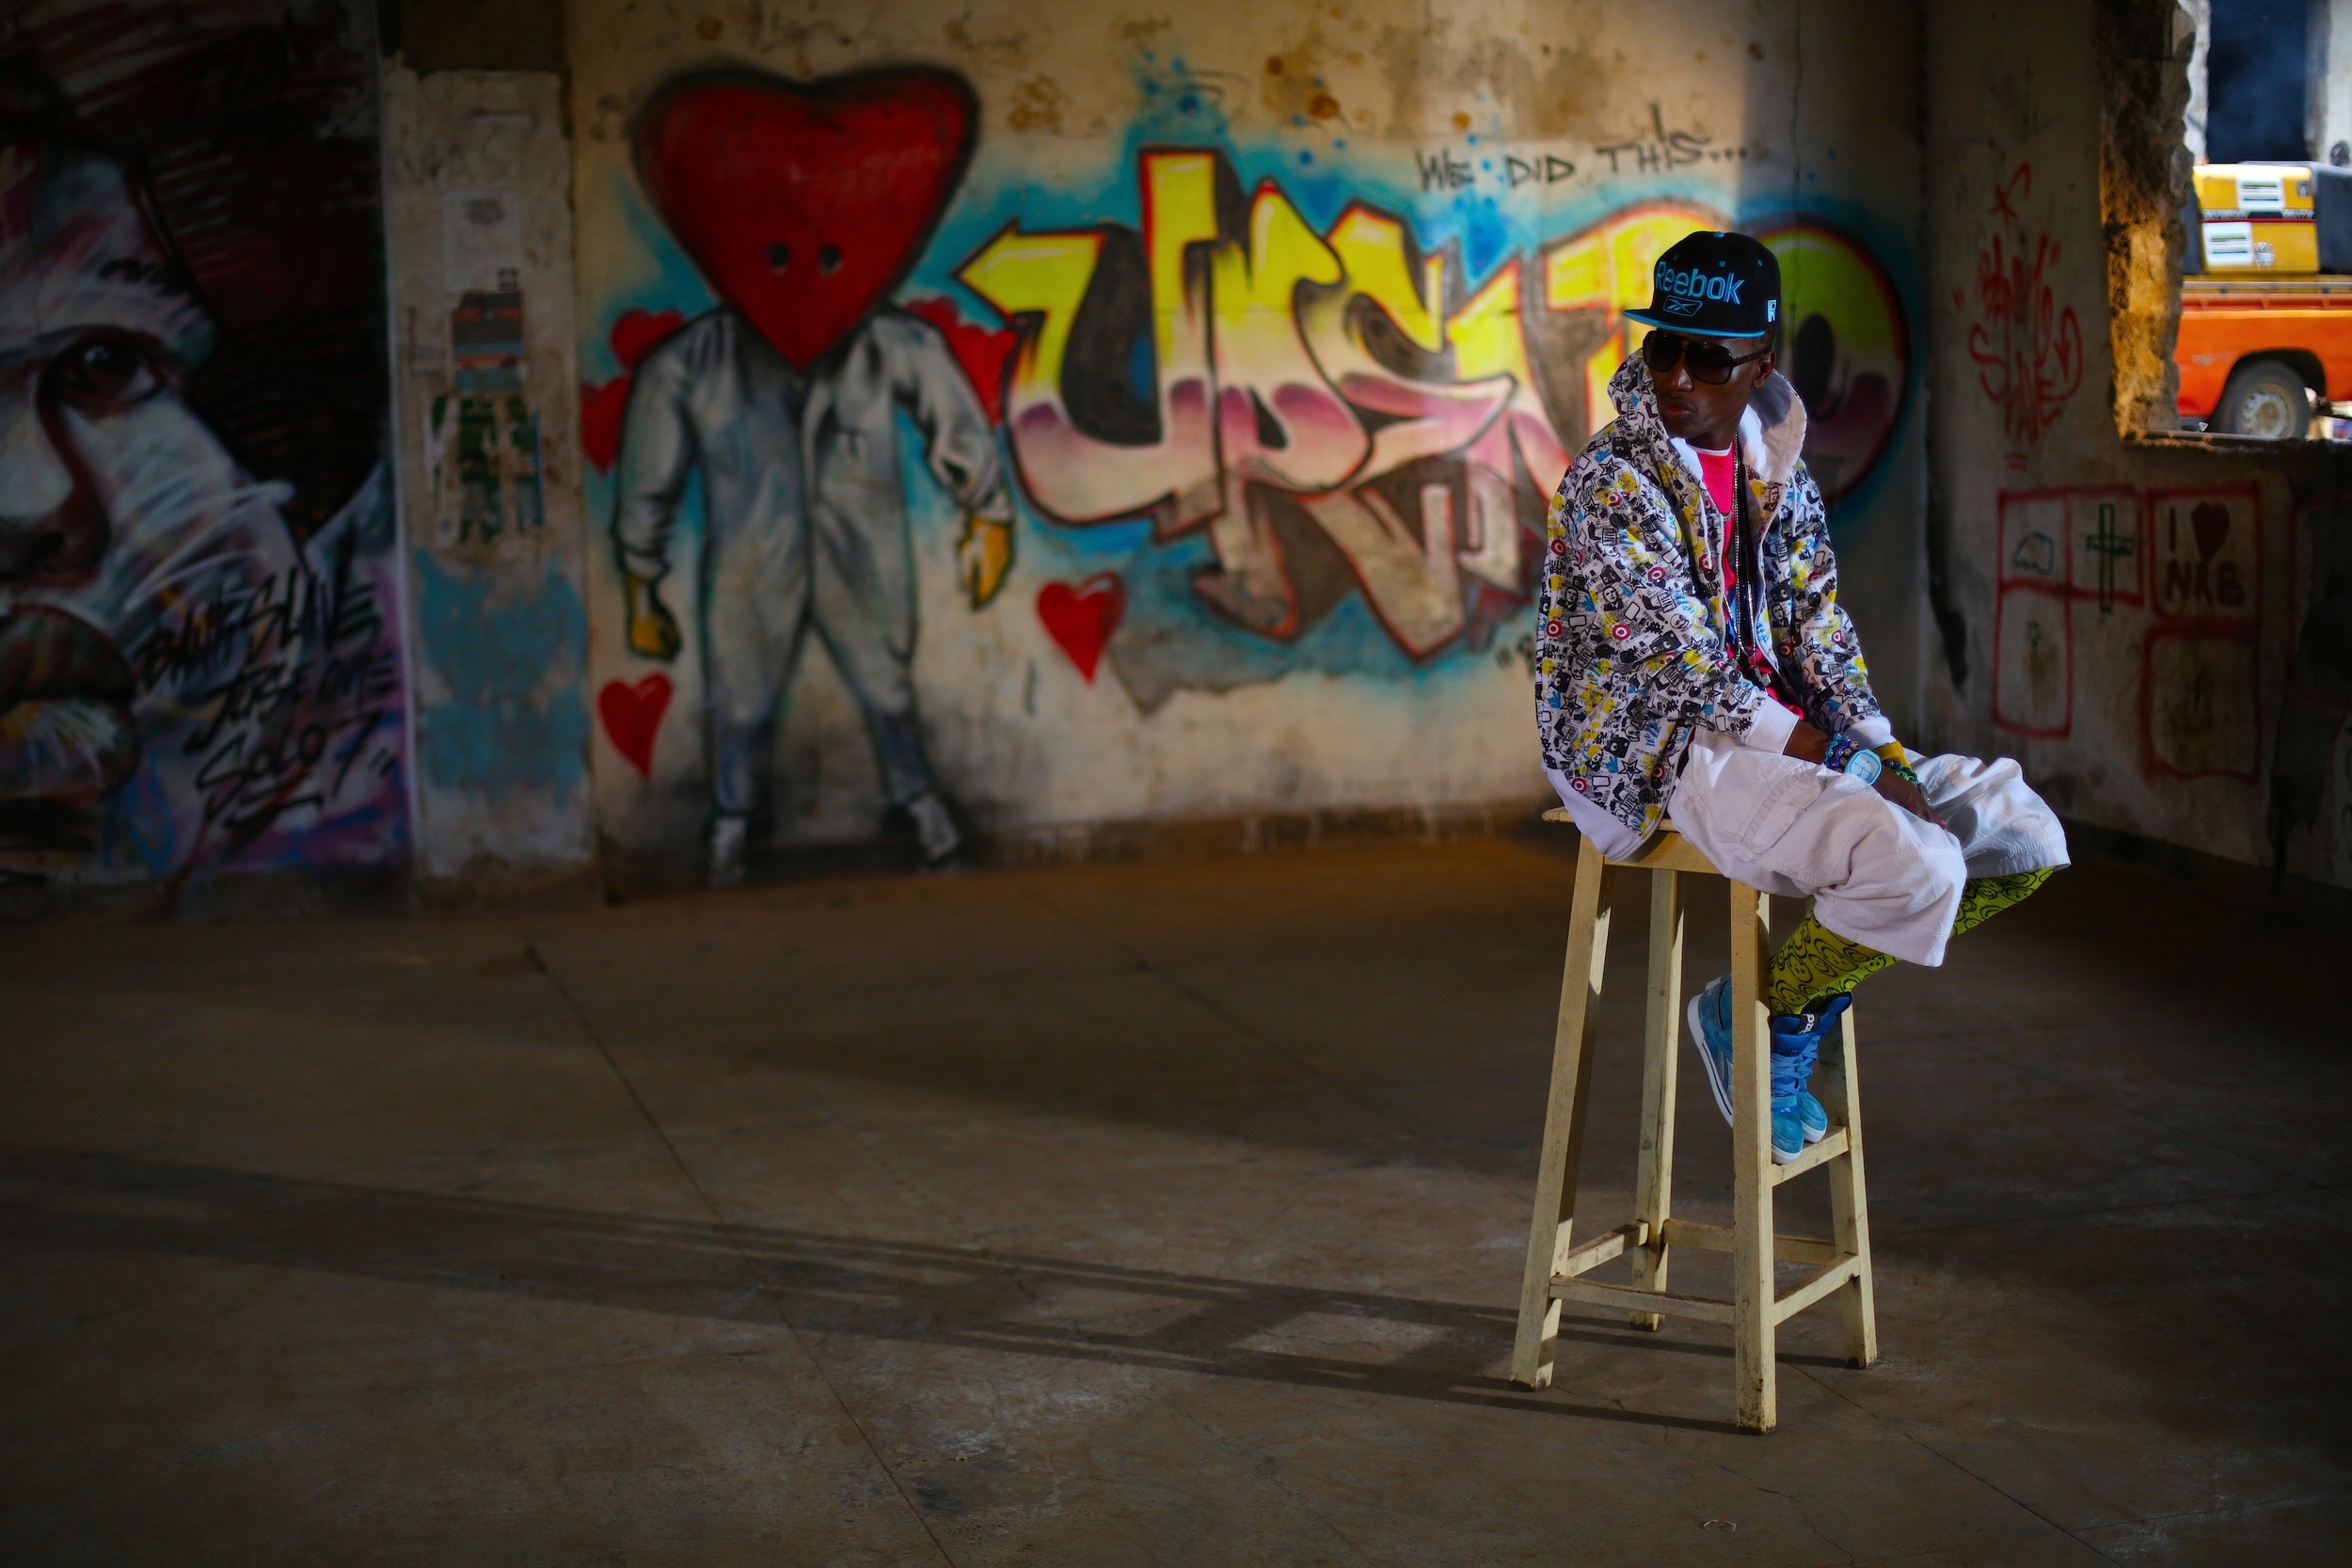 Kenyan rapper Octopizzo on the set of his music video, Swag music